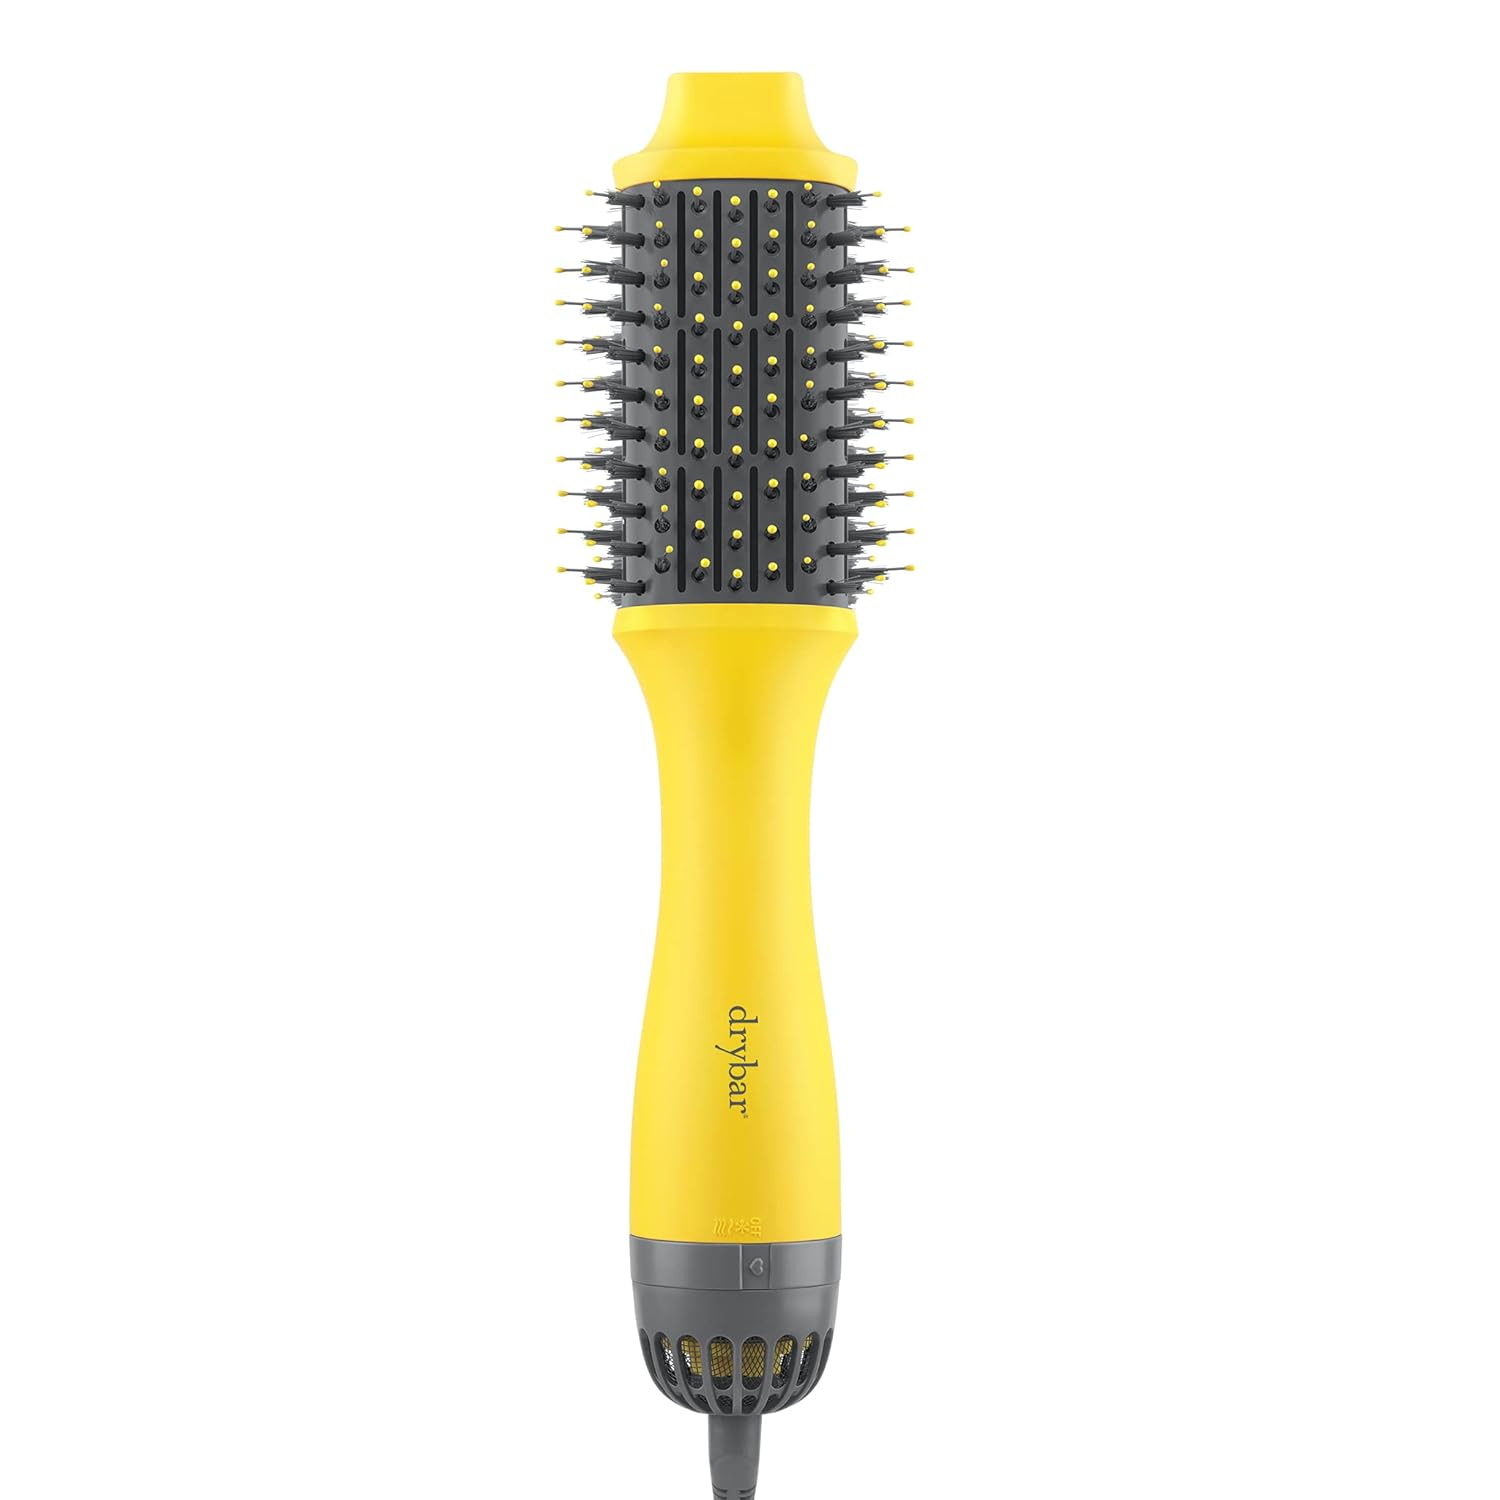 Drybar The Double Shot Oval Blow Dryer